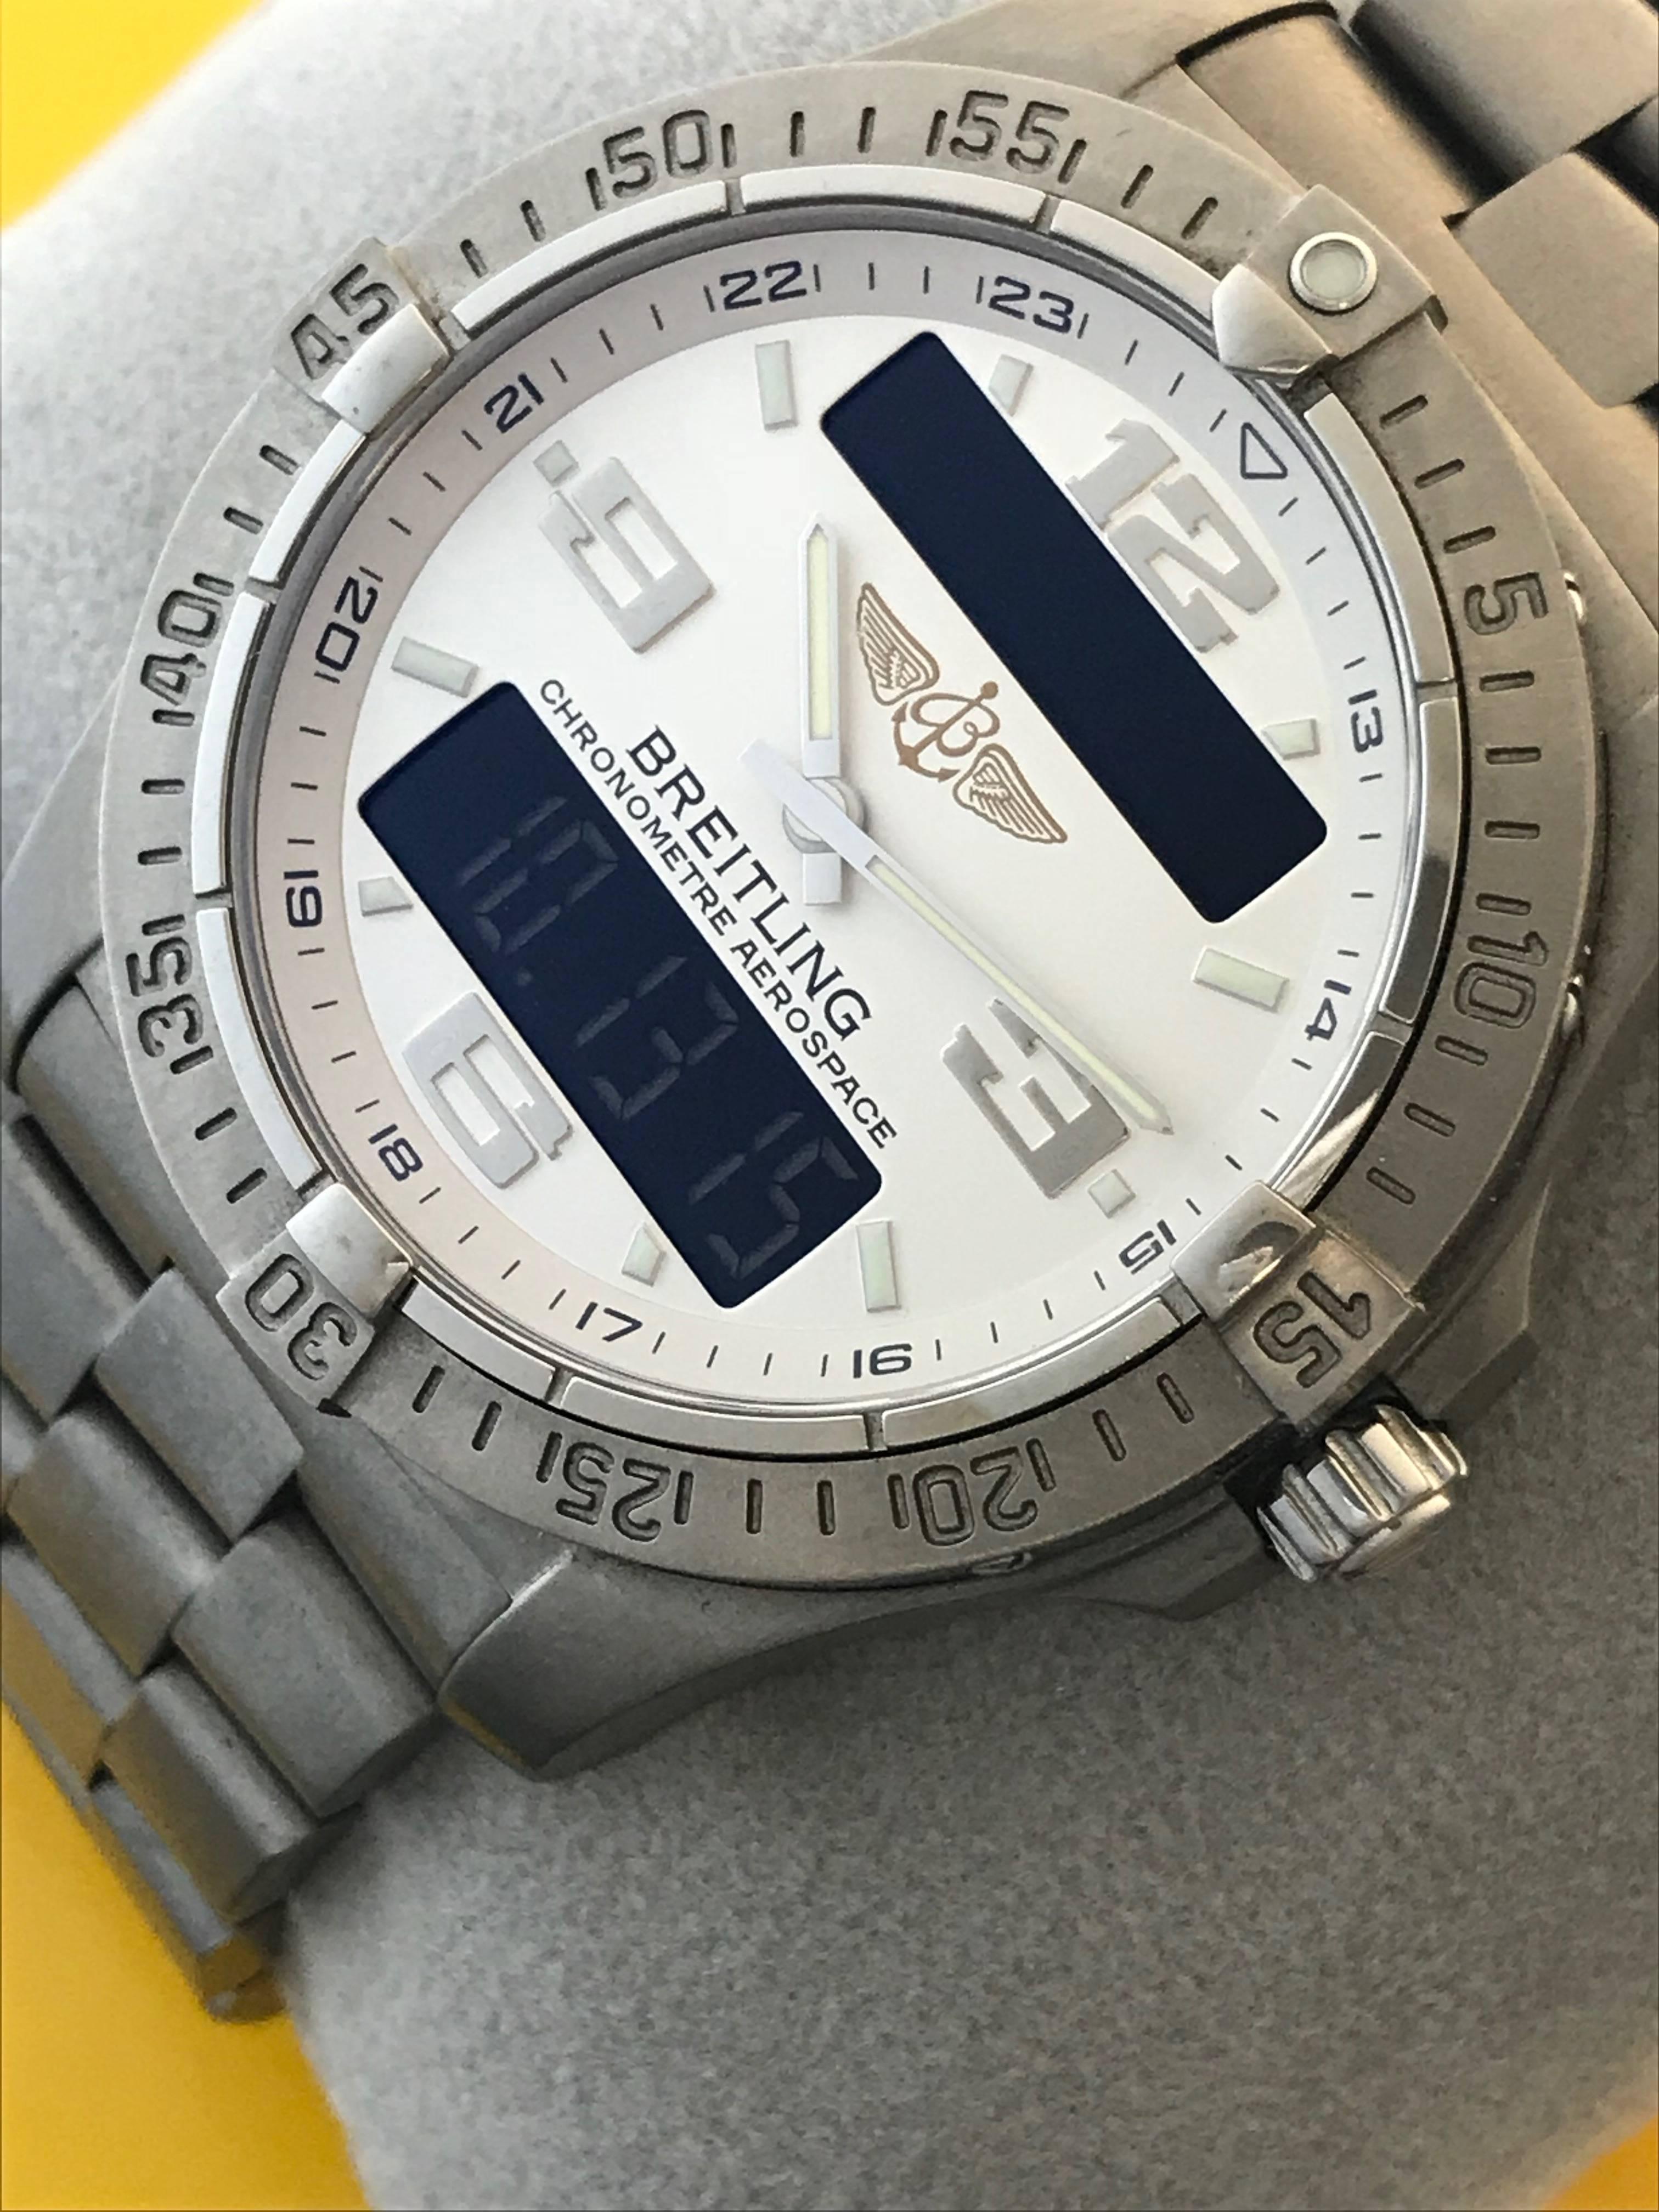 Breitling Aerospace Avantage Men's Titanium Quartz GMT Men's wrist watch. Model E7936210/G606. Certified pre-owned and ready to ship! Features Chronograph, GMT 2nd Time Zone and Alarm, Perpetual Day and Date Calendar, Electronic and Analog LCD